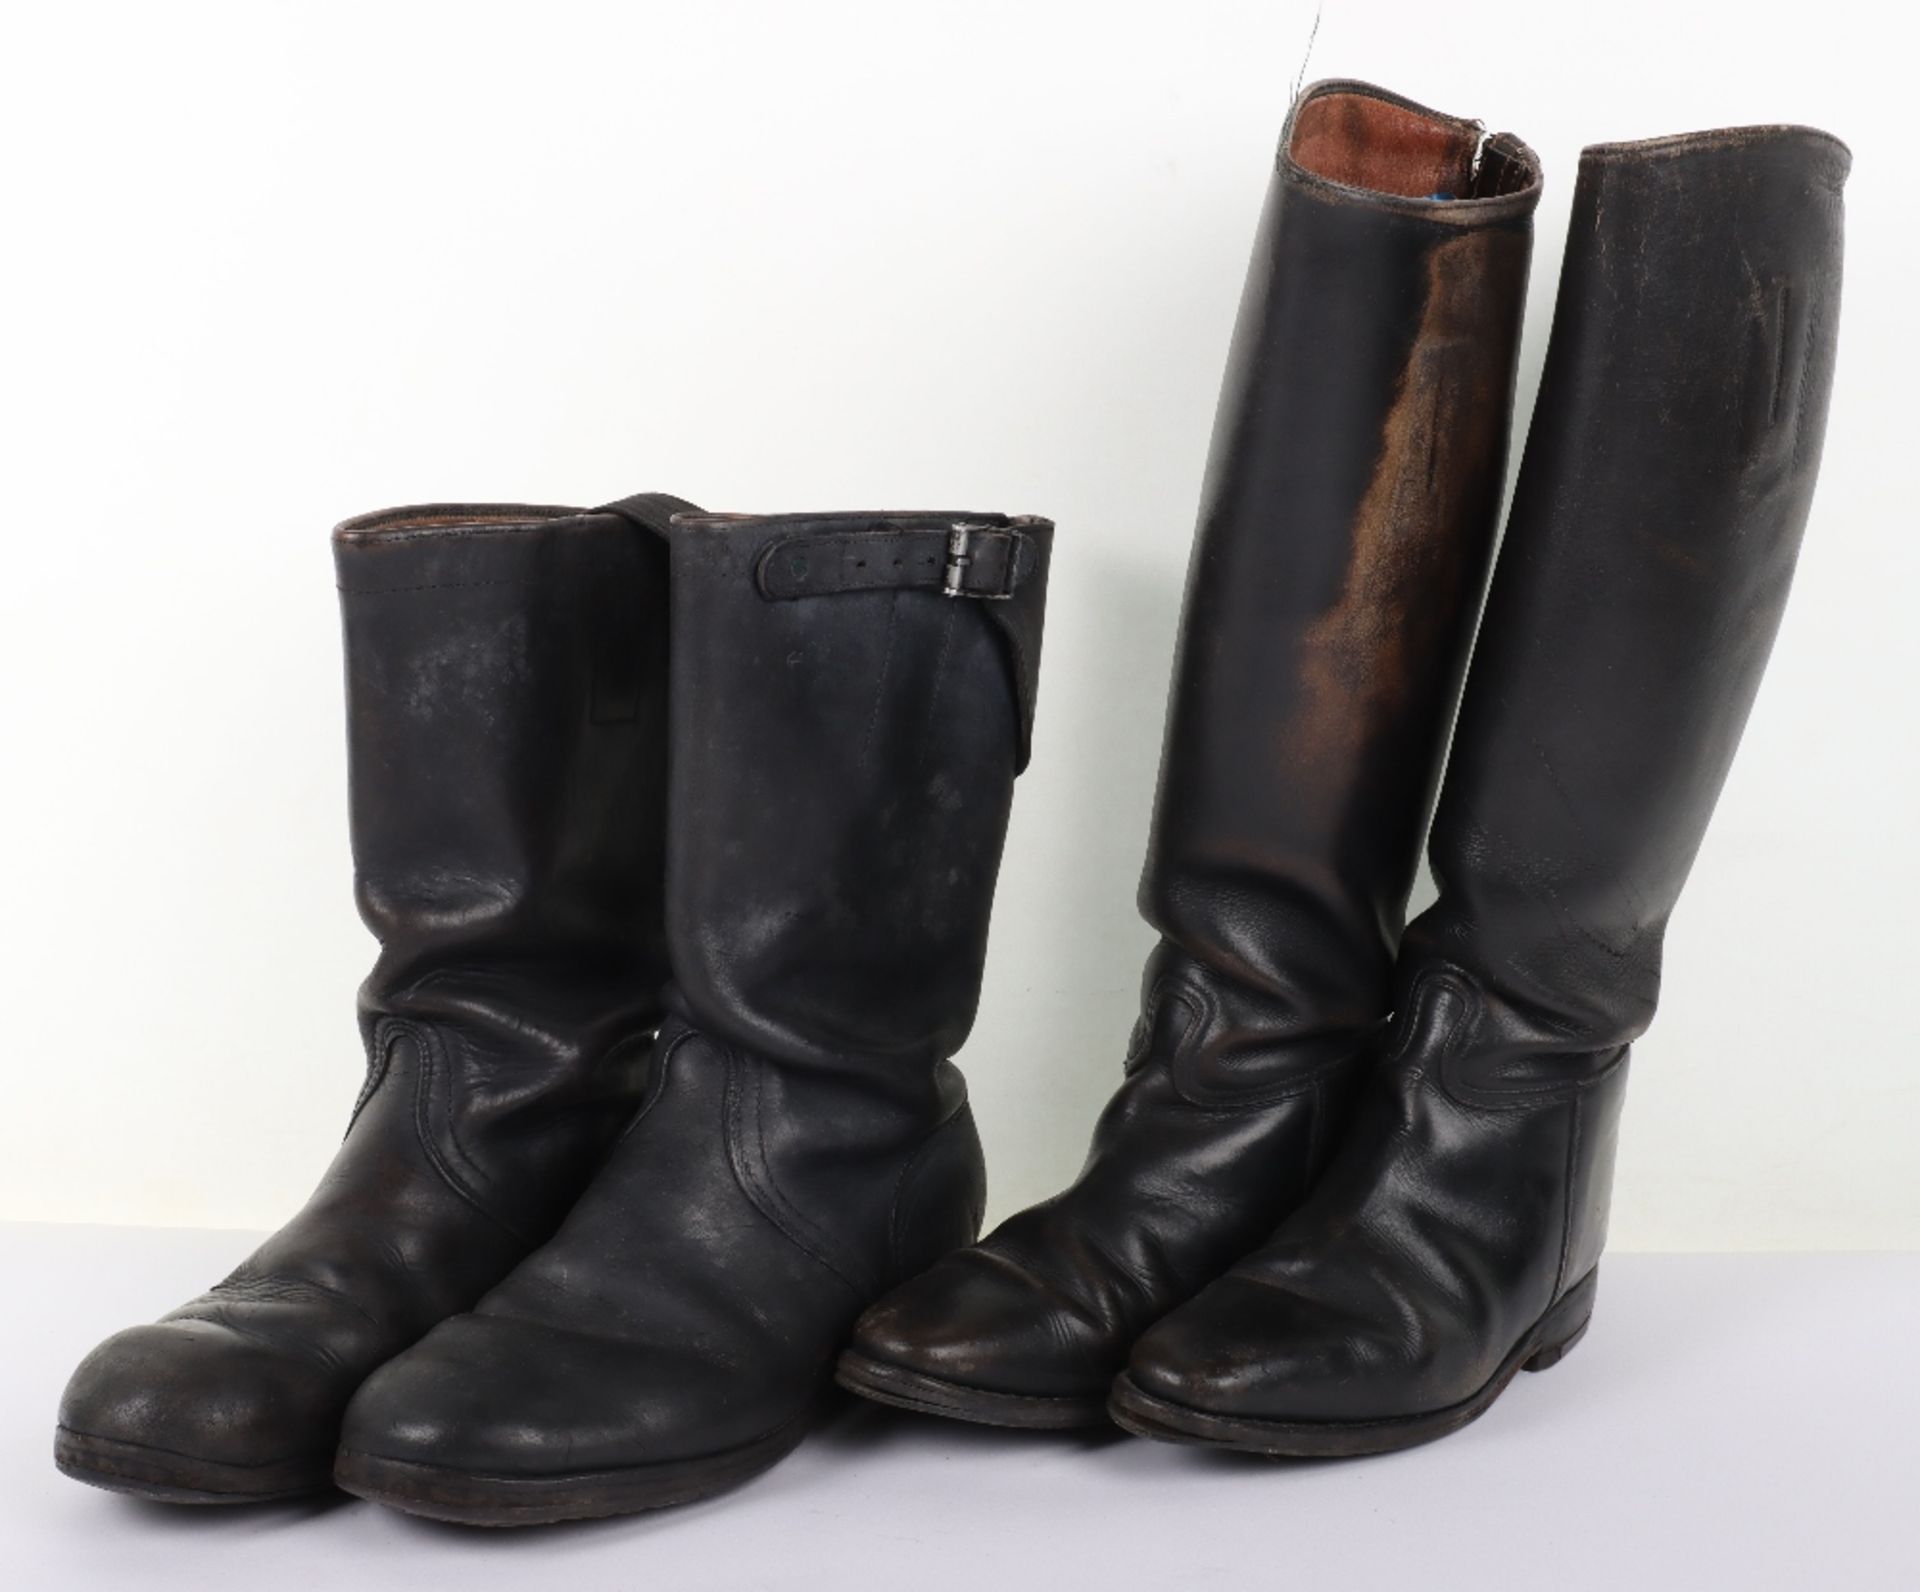 Pair of WW2 Style German Black Leather Boots - Image 2 of 4